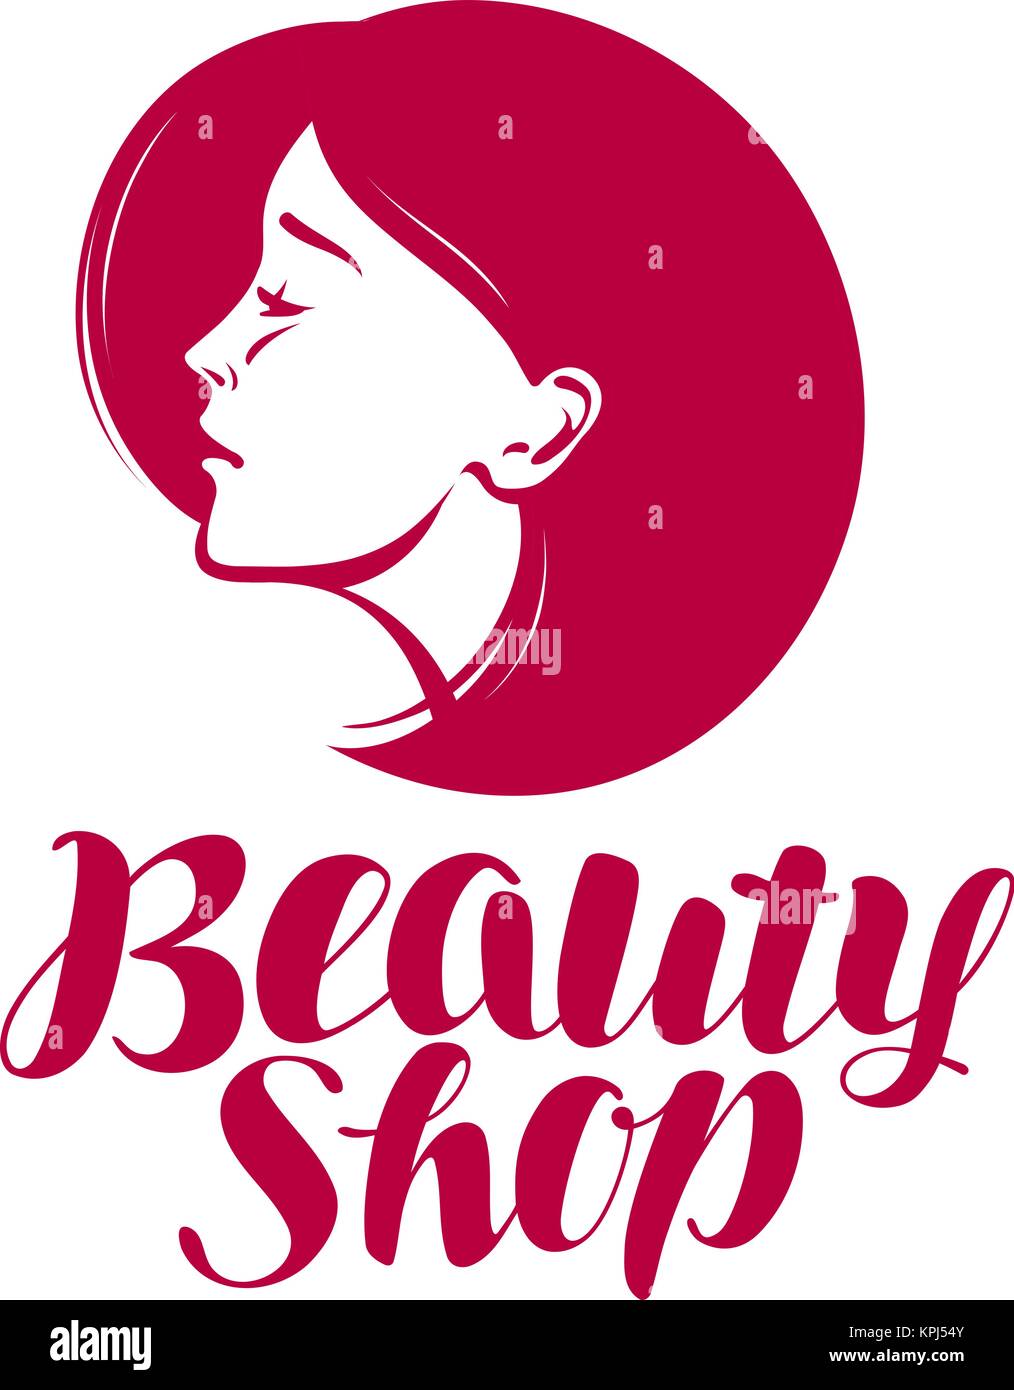 Beauty shop, logo or label. Makeup, cosmetic, spa icon. Lettering vector illustration Stock Vector